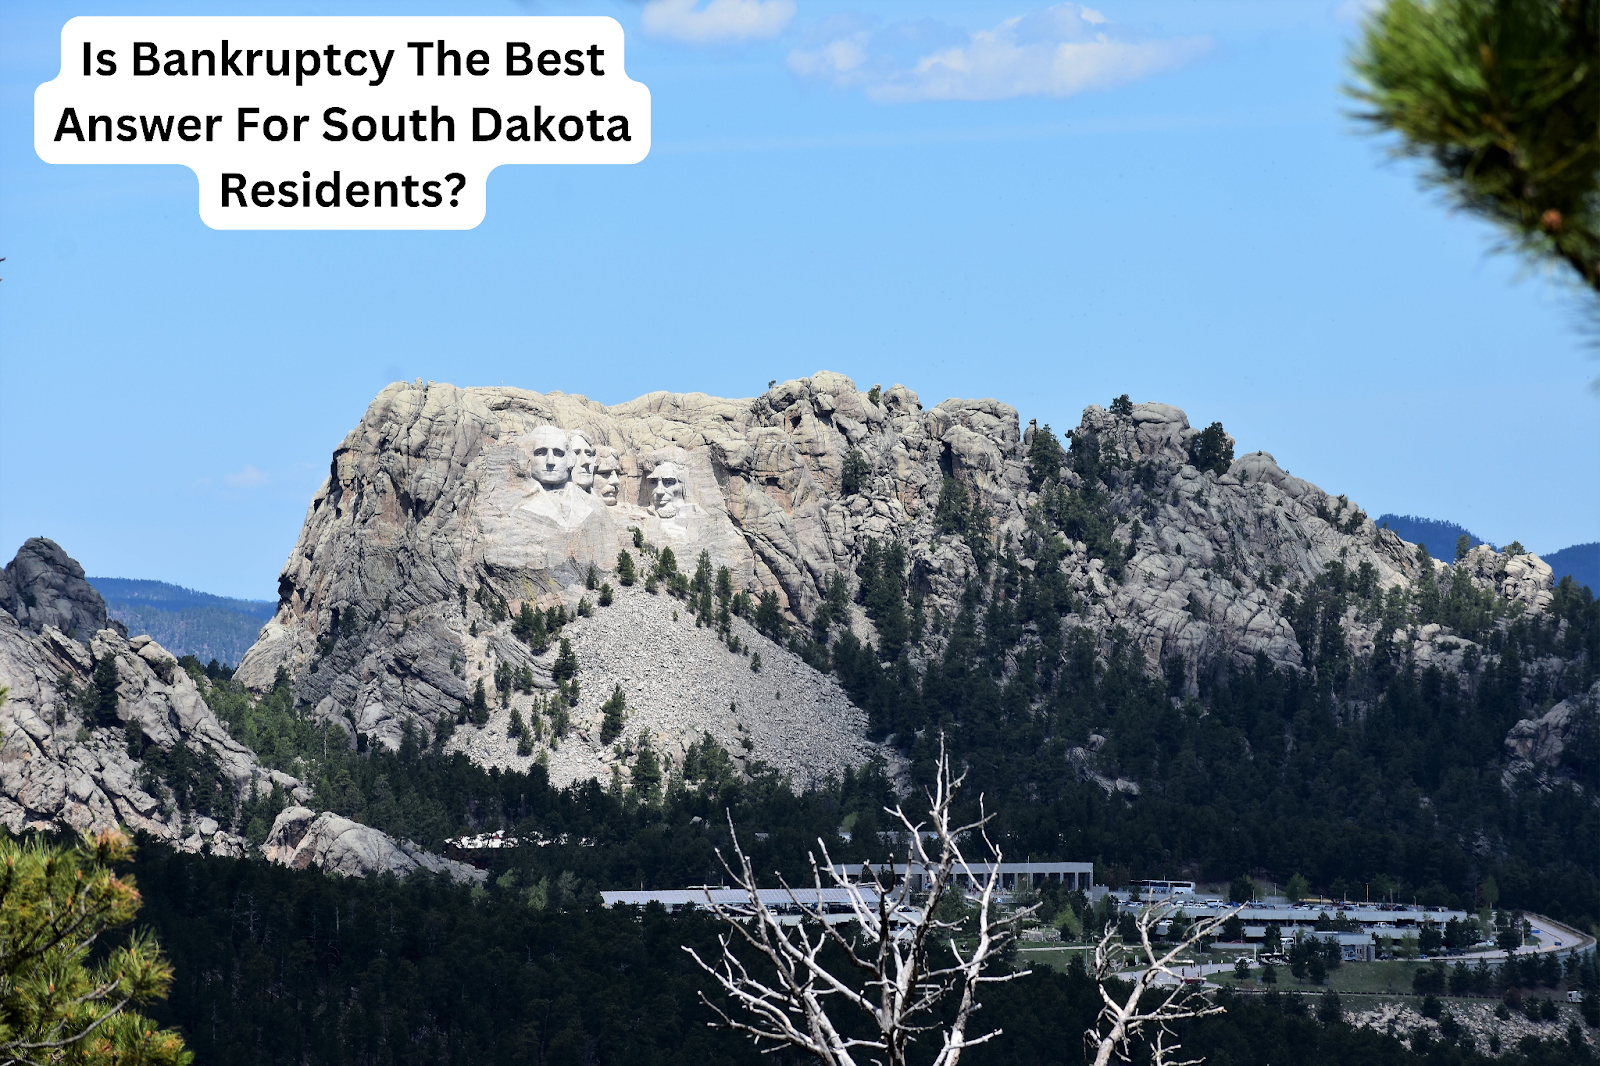 Is Bankruptcy The Best Answer For South Dakota Residents?